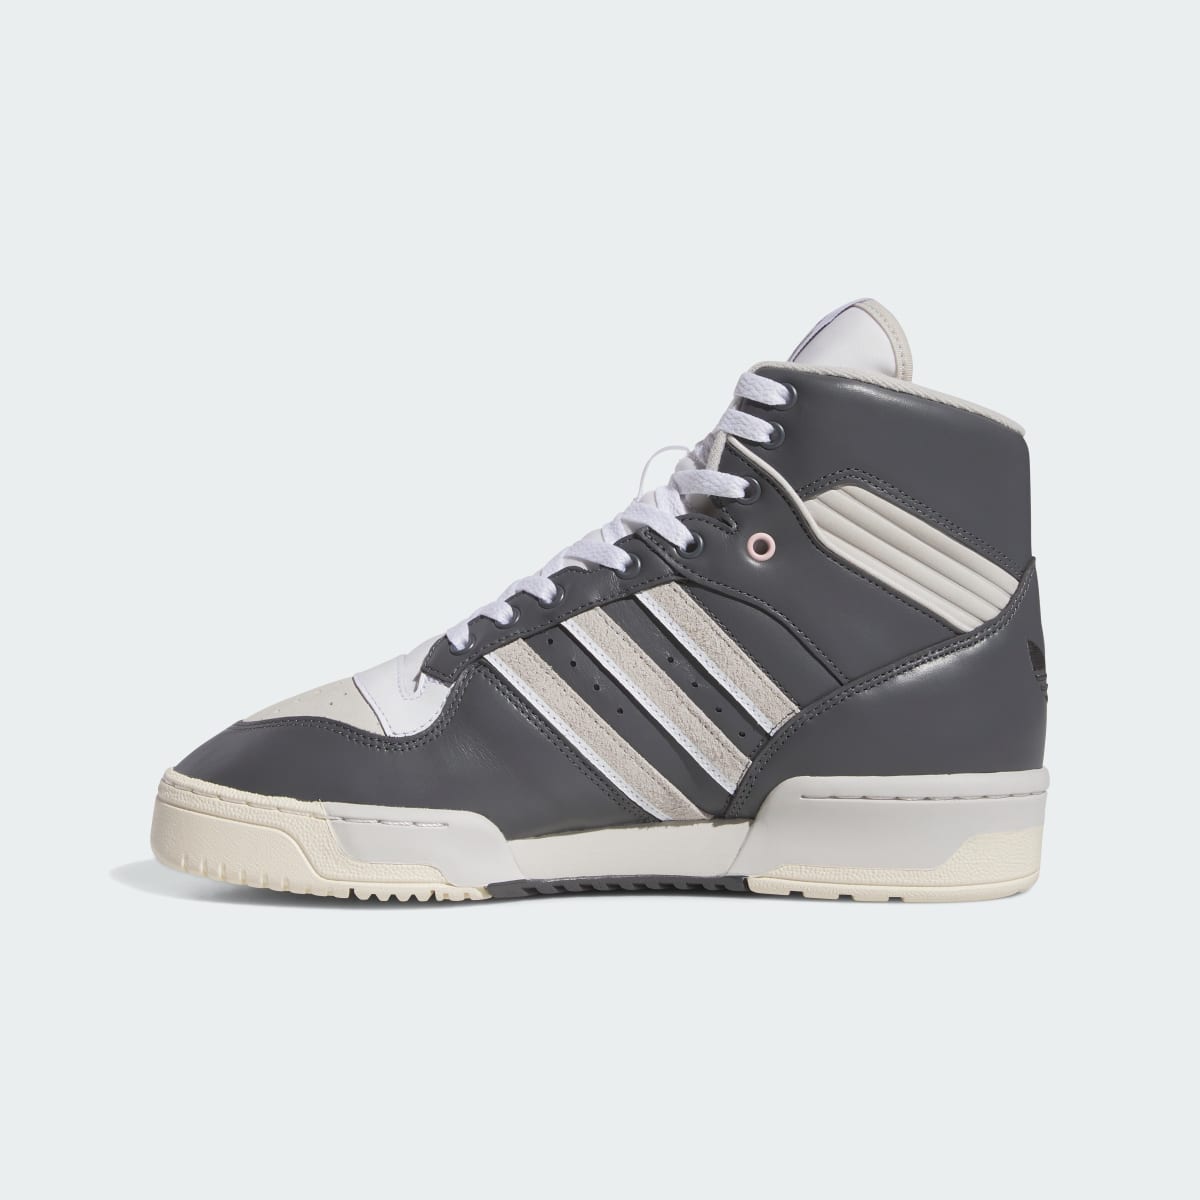 Adidas Rivalry High Scratchy Schuh. 9